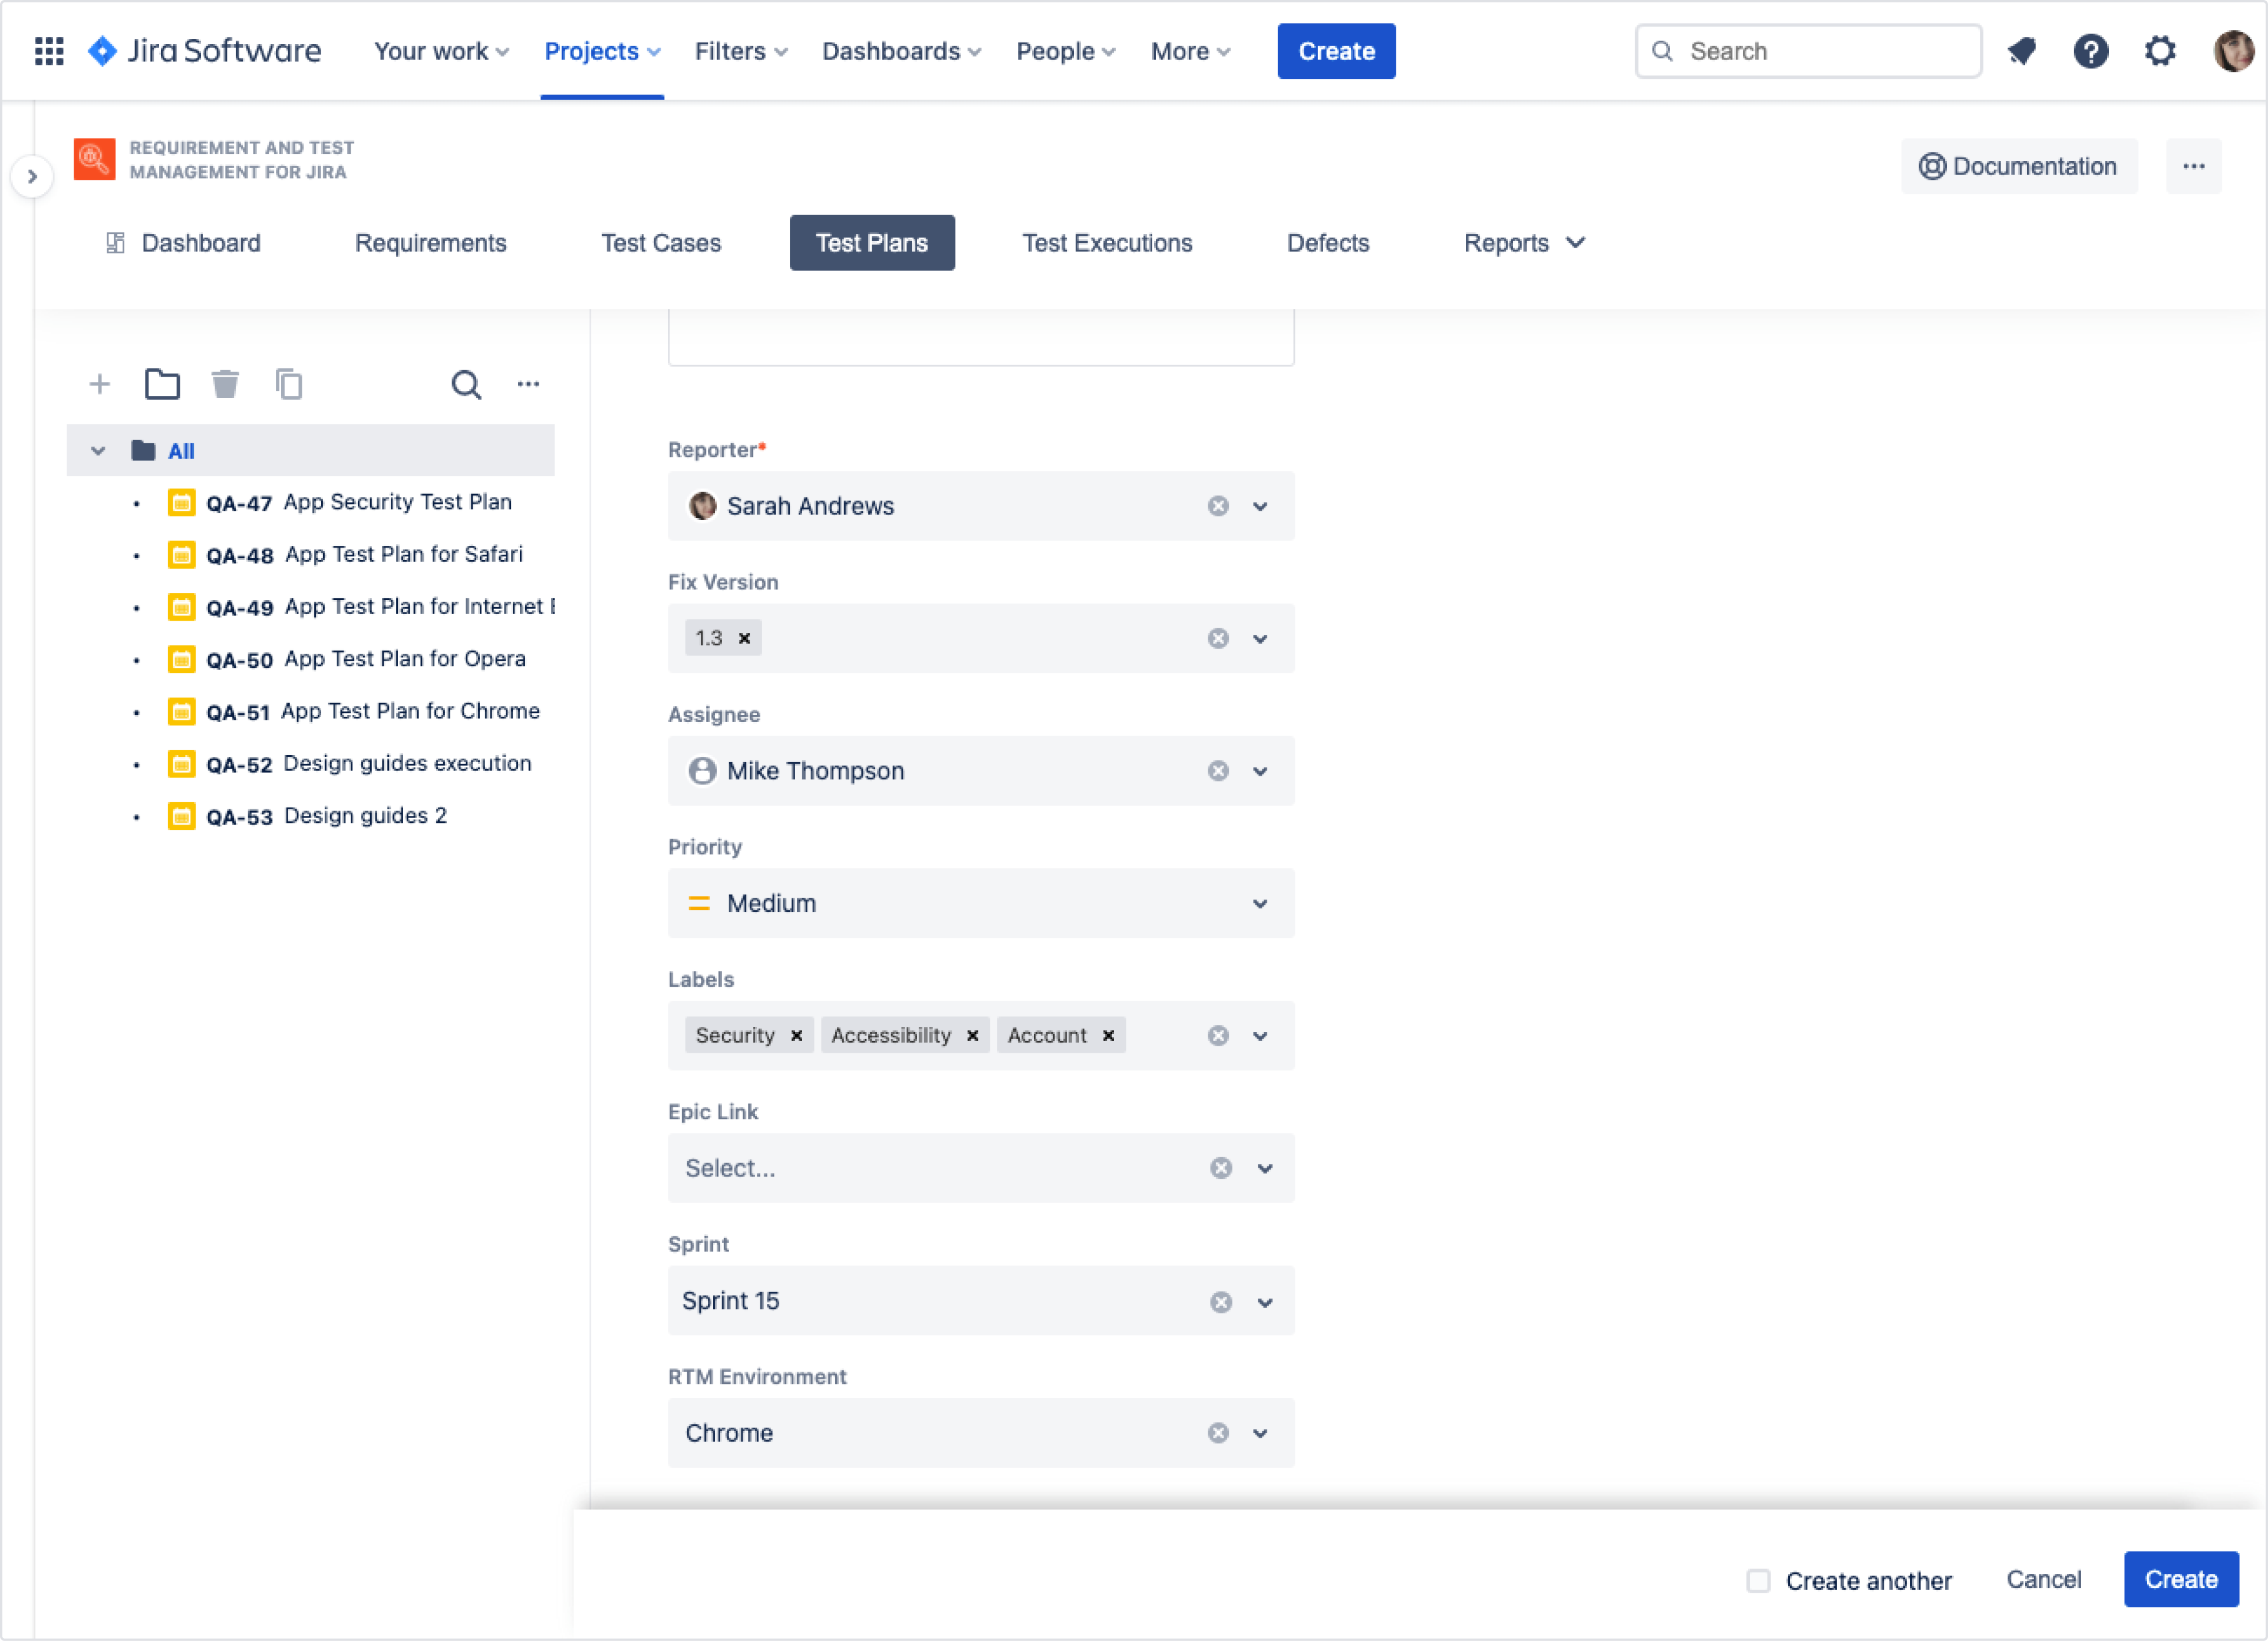 How to create a Test Plan in Jira